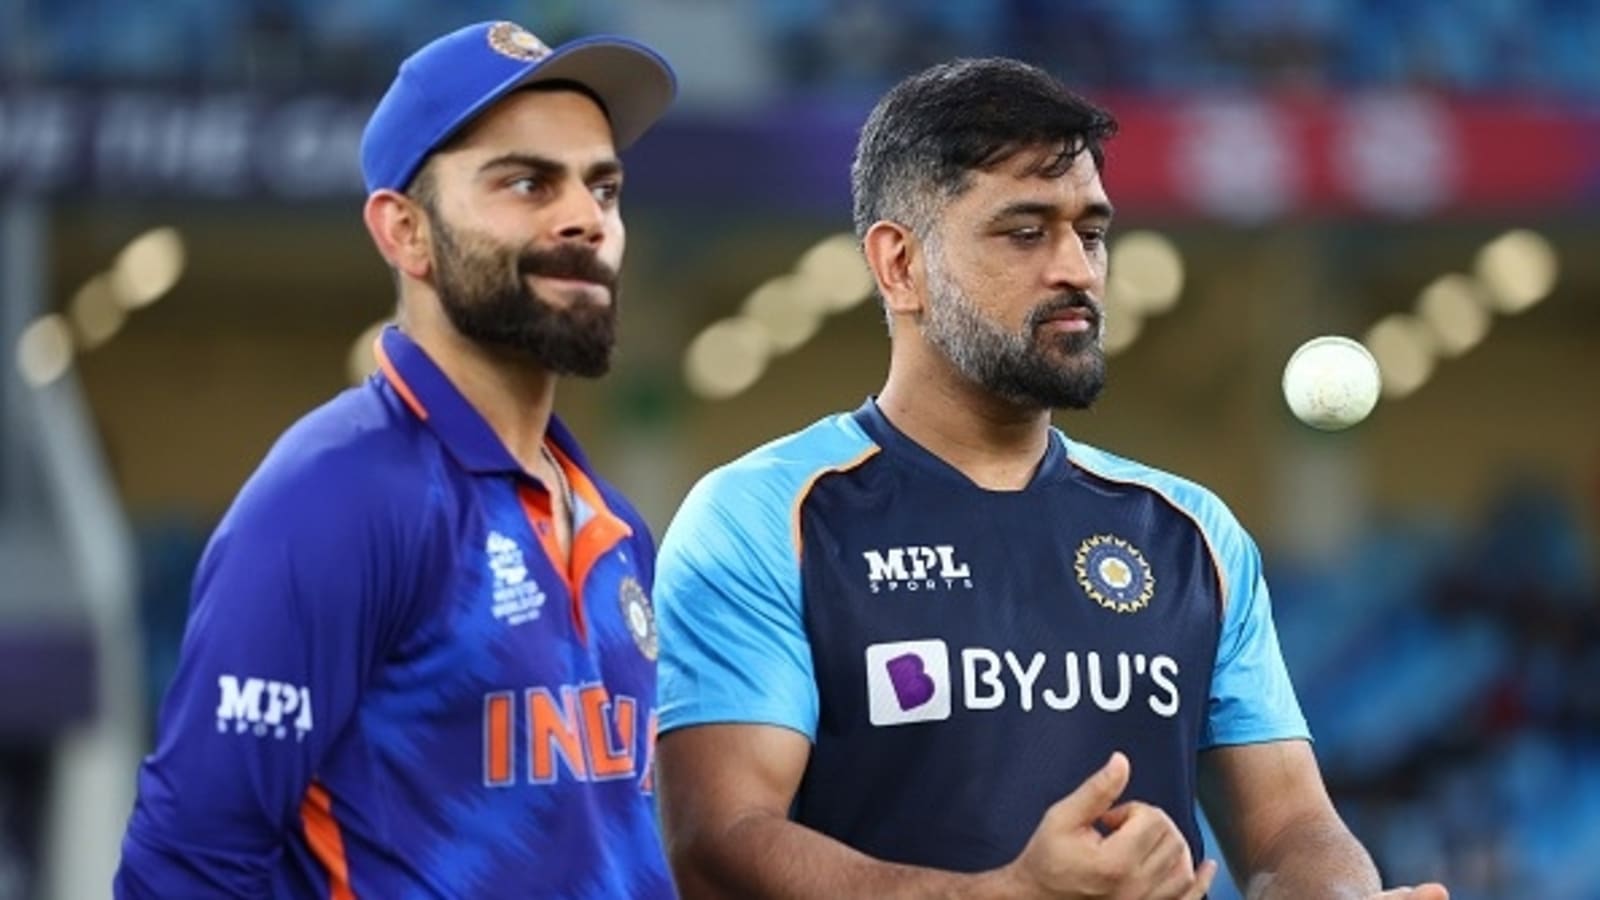 ‘MS Dhoni told me I don’t fit the combination, Virat Kohli said I’ll let you know but never did’: India spinner’s ordeal